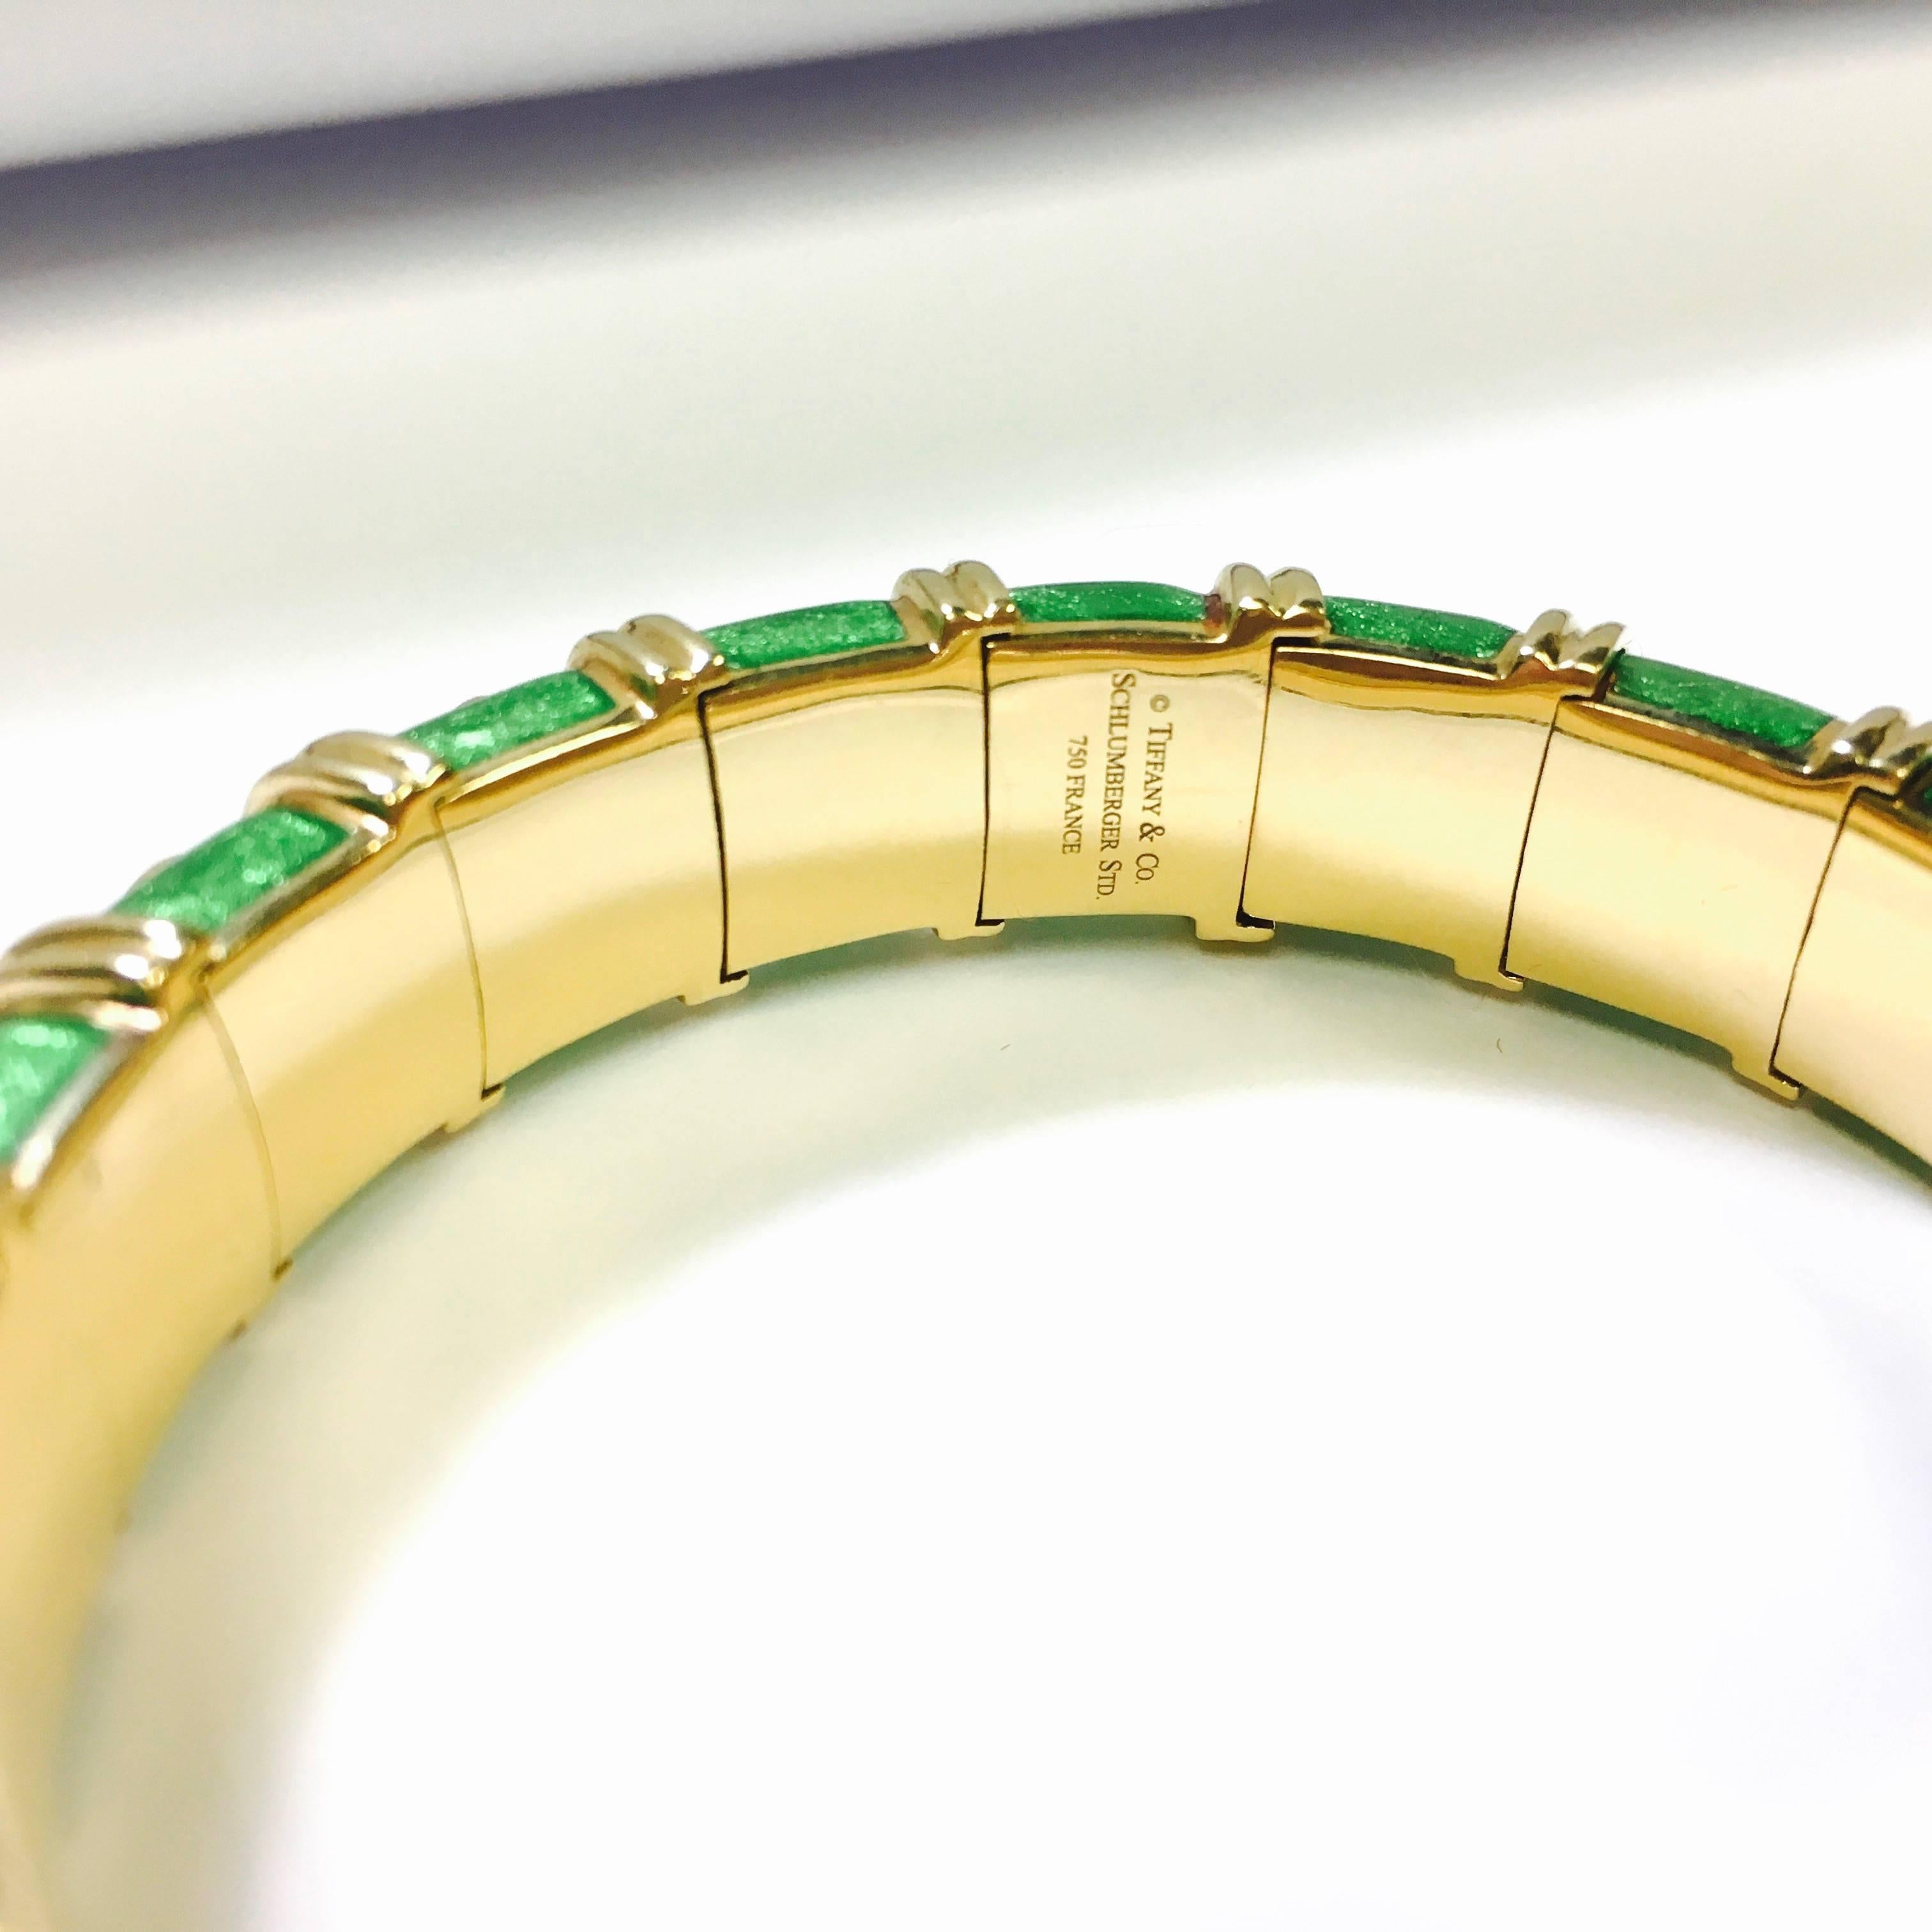 Jean Schlumberger designed Croisillon bangle bracelet for Tiffany & Co. Crafted in 18k yellow gold with bright apple green enamel. The piece is hallmarked: “TIFFANY&Co. SCHLUMBERGER STD 750 FRANCE on the inside of the bracelet. 
Measurements: